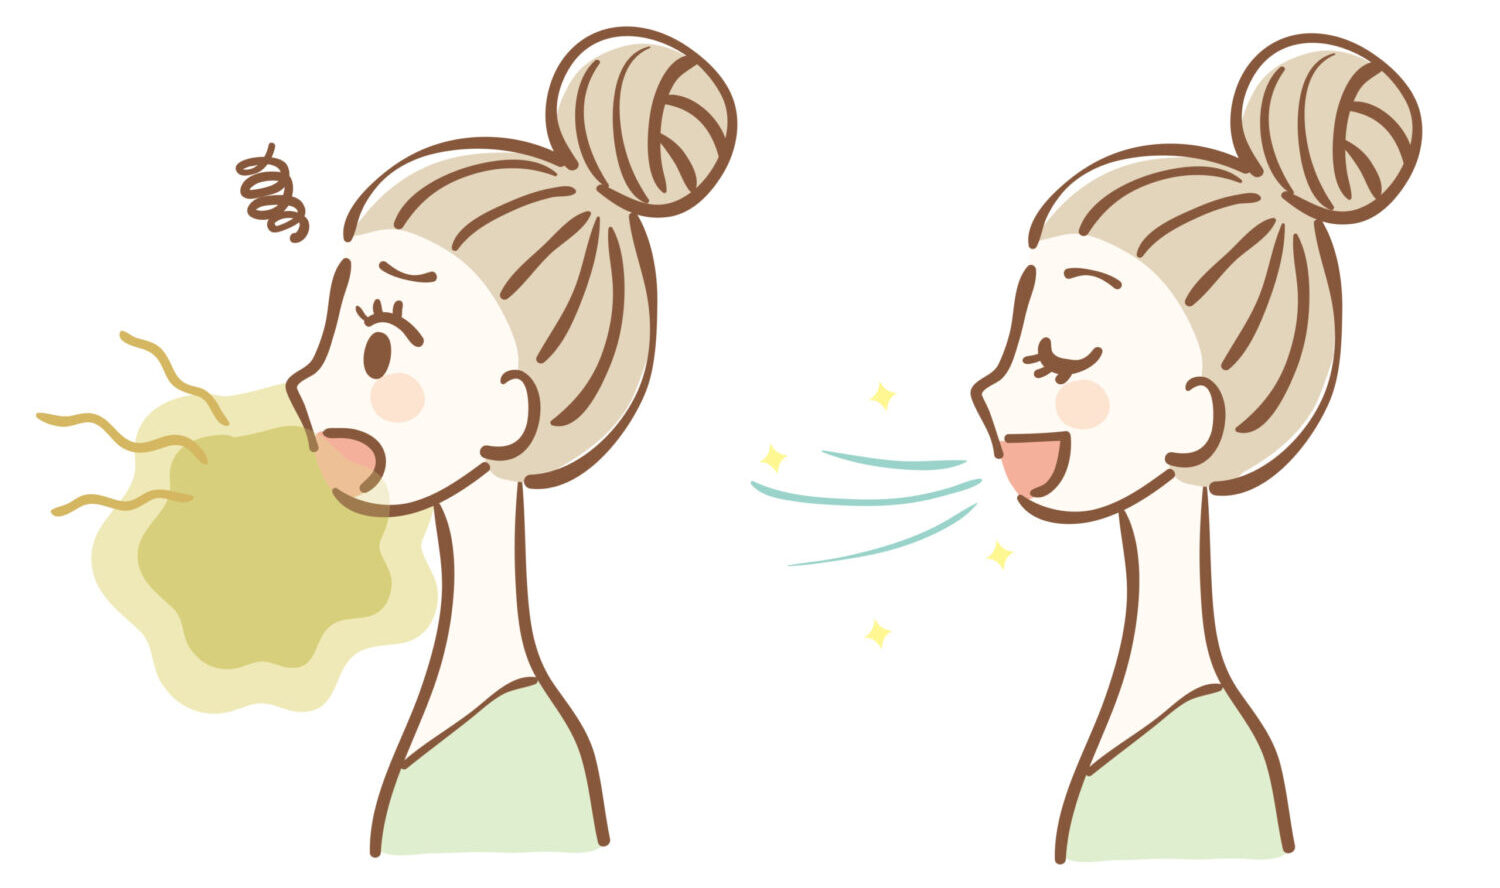 Illustration of a brunette woman in a bun embarrassed by bad breath next to the same woman smiling with fresh breath